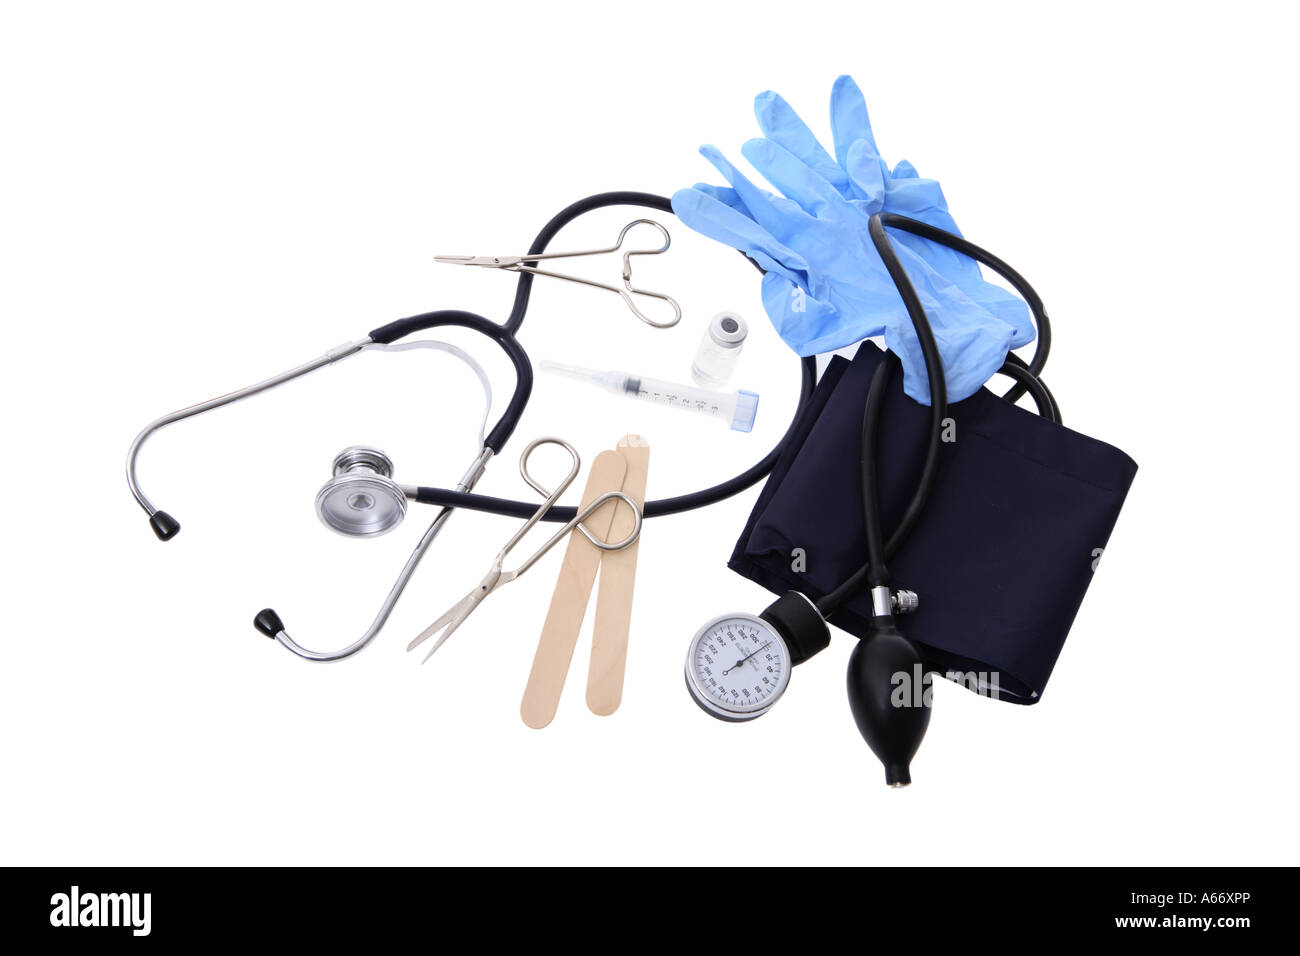 Doctor's equipment cut out on white background Stock Photo